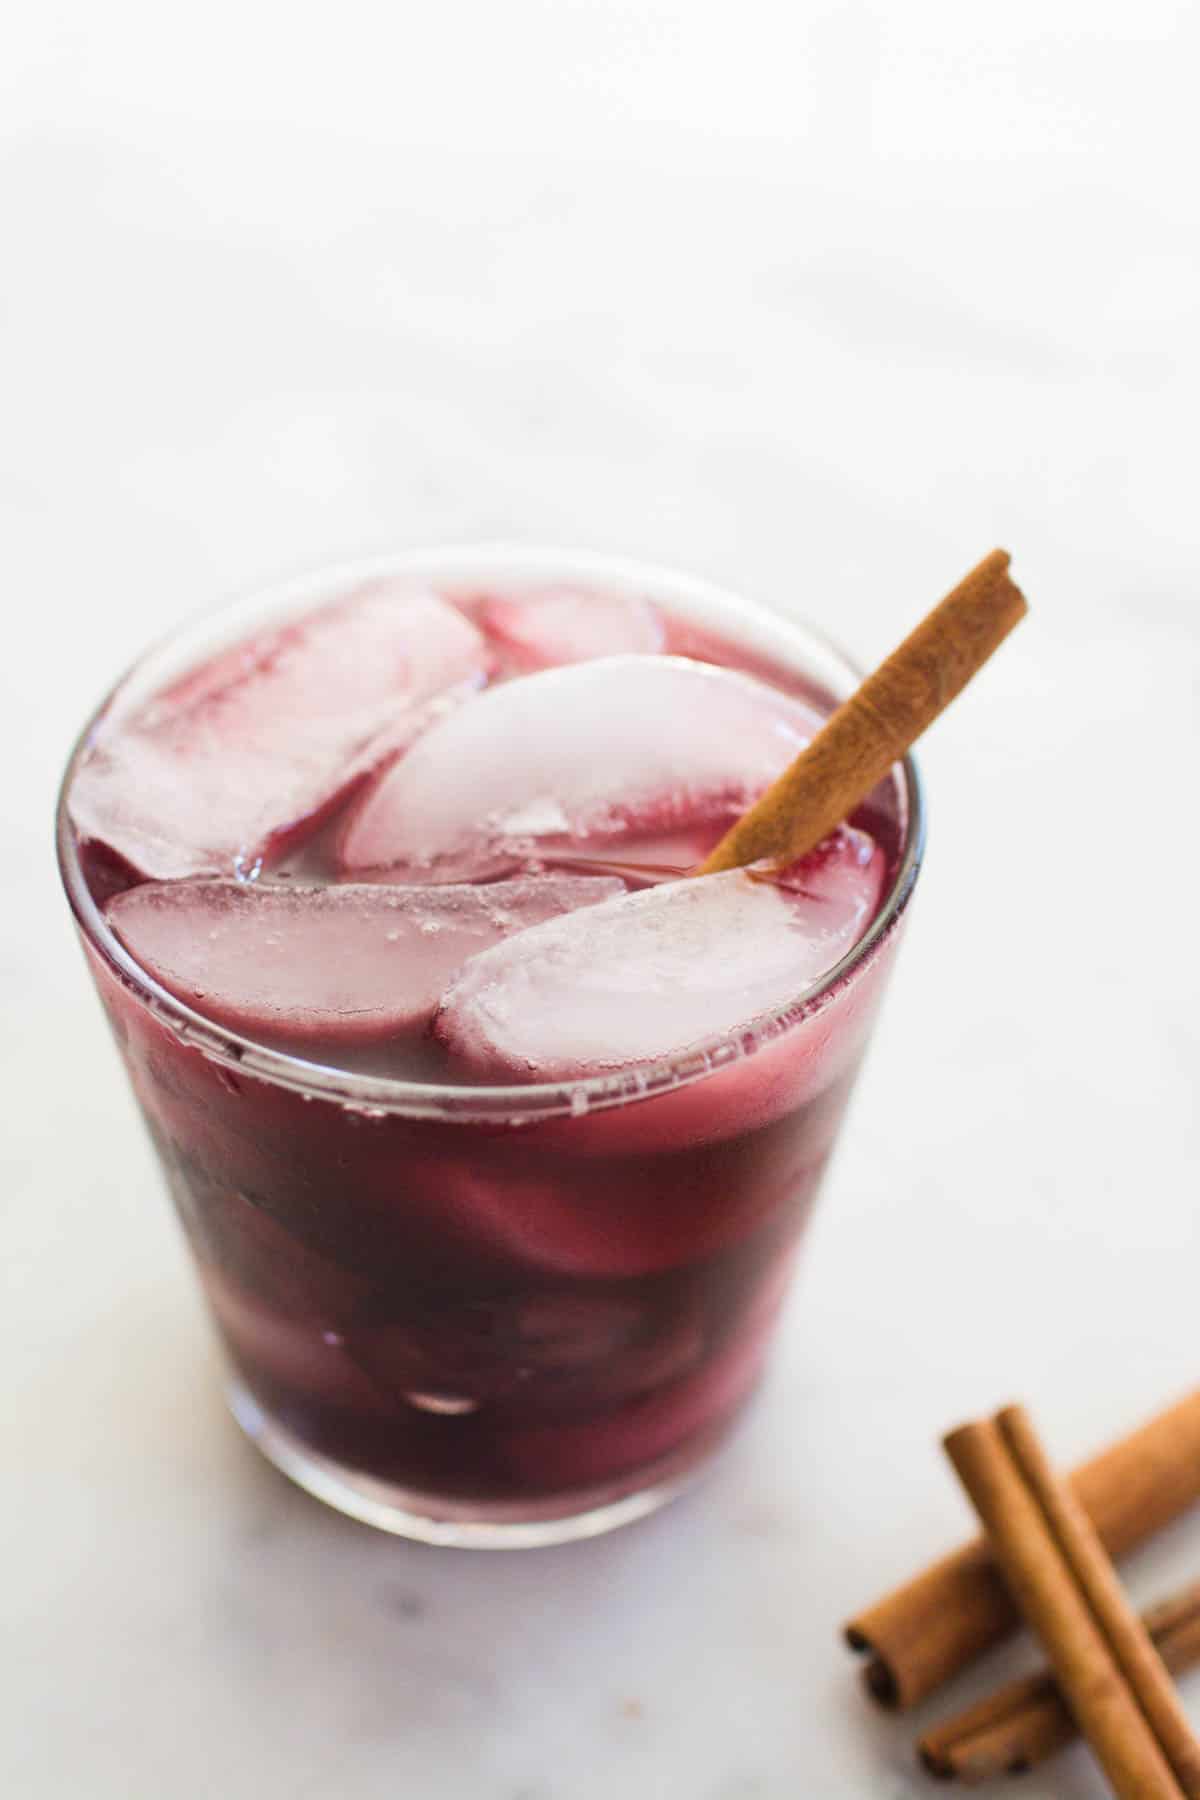 A glass full of iced sangria made with red wine and cooked apples.